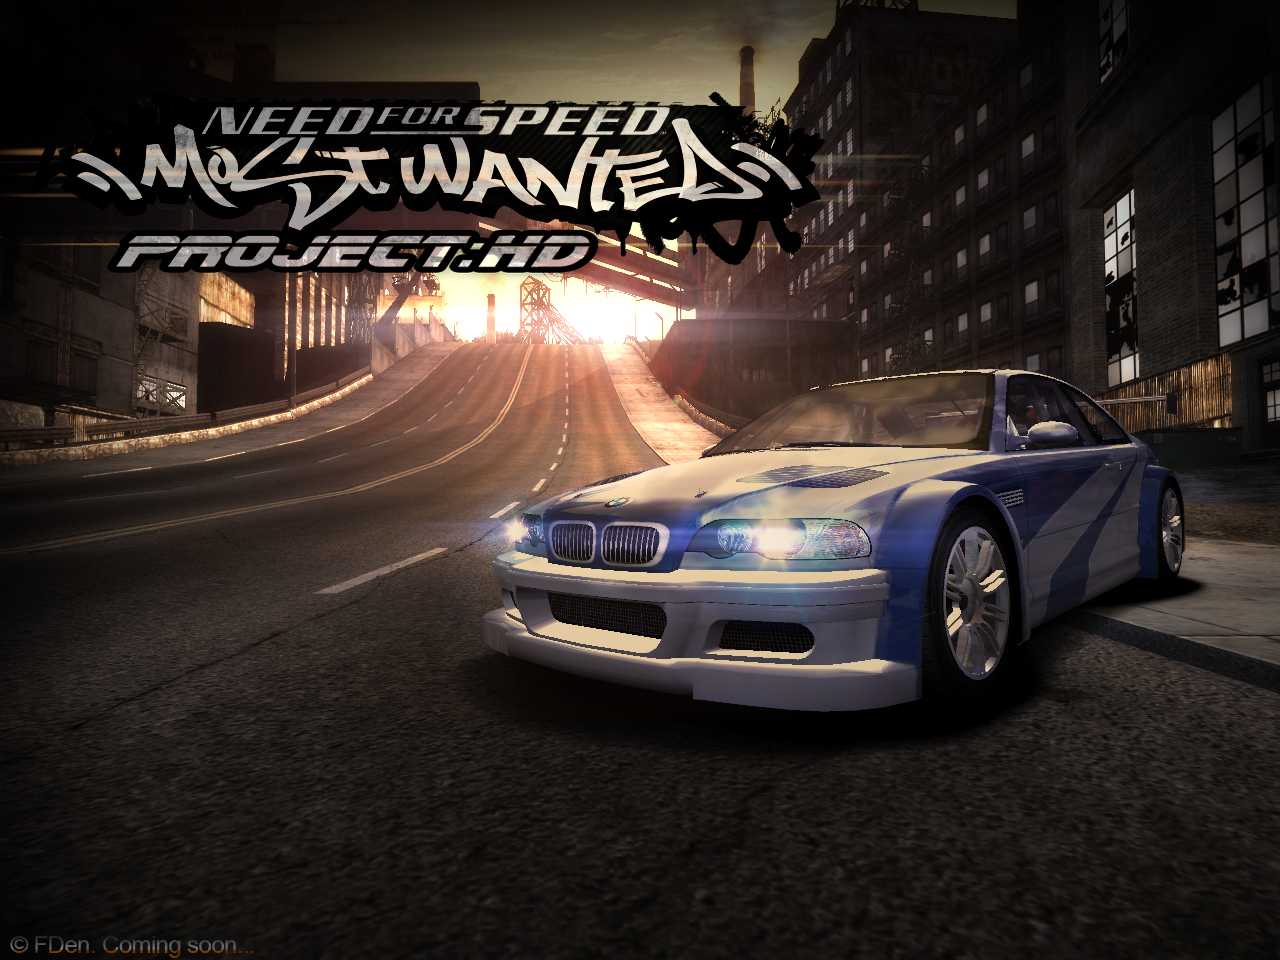 Need for speed: most wanted (2012) "ultra graphic mod" .